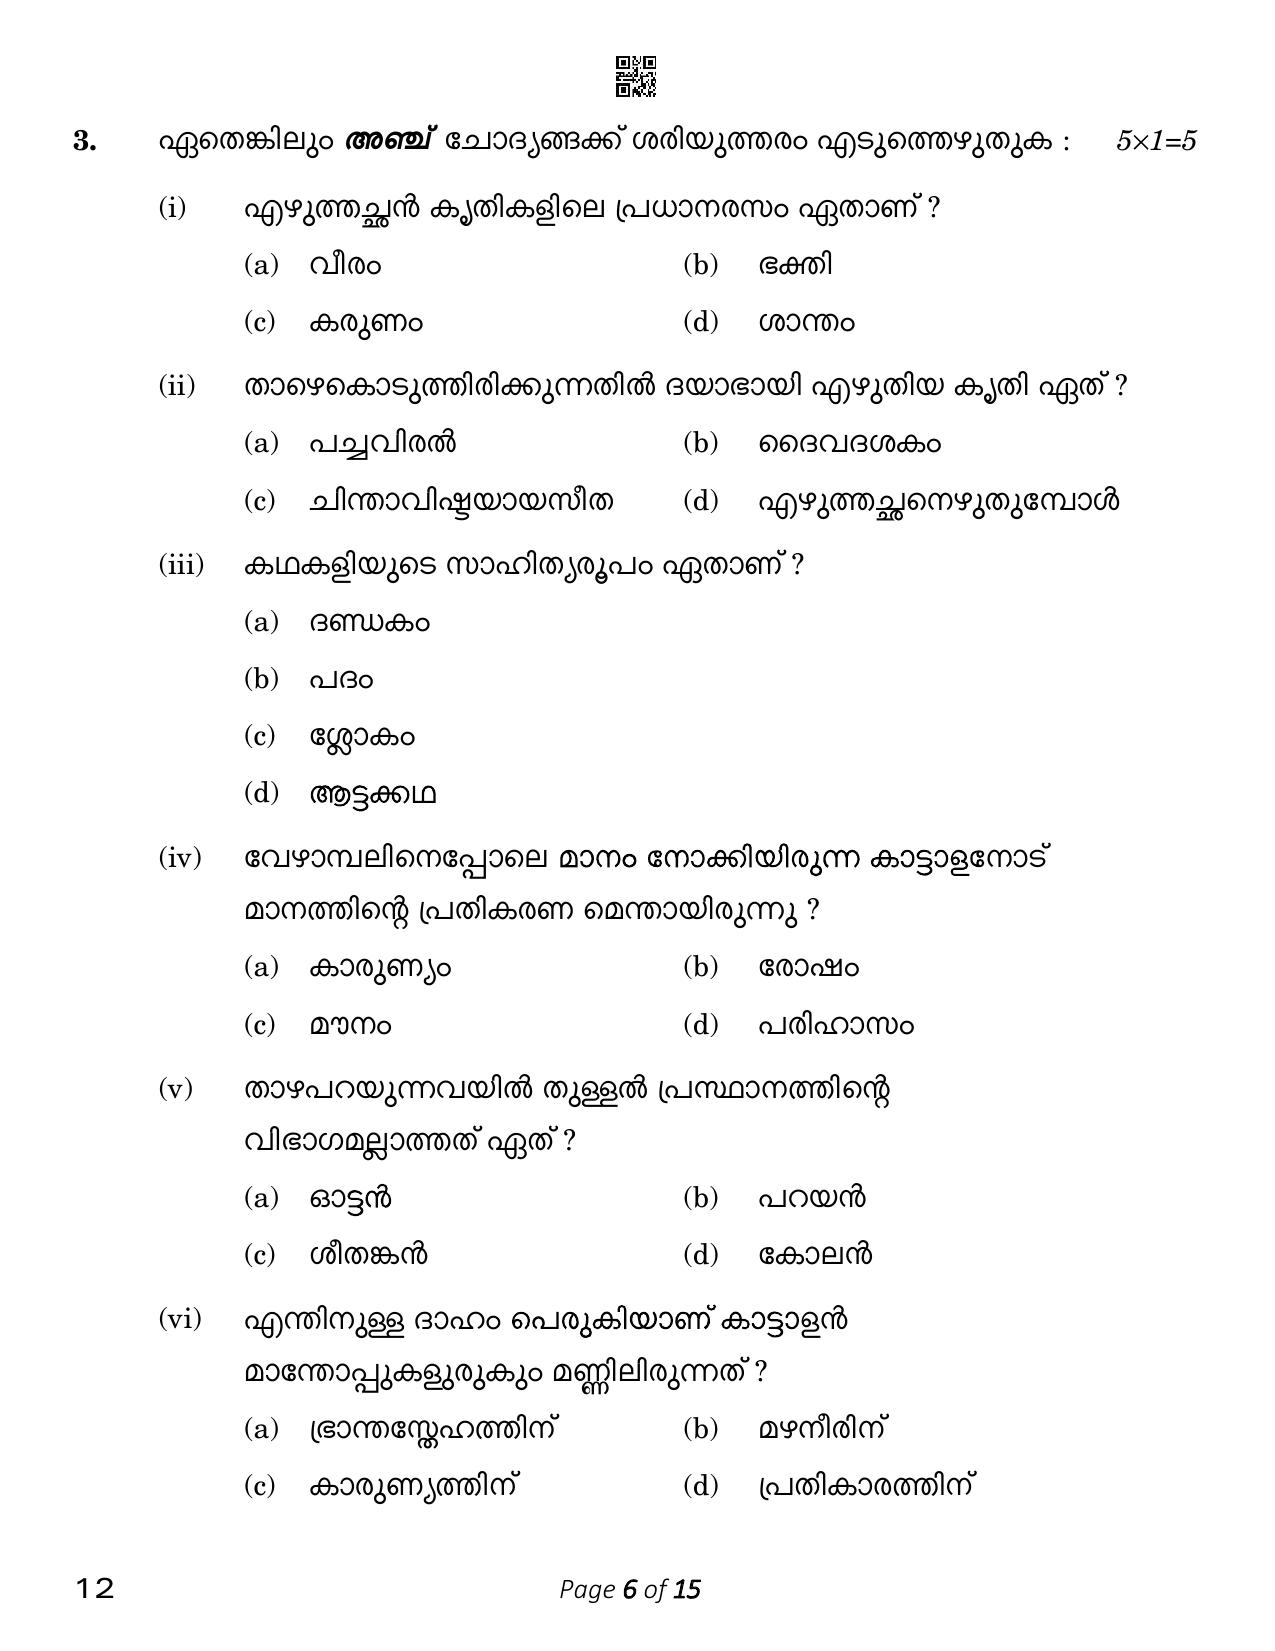 CBSE Class 12 Malayalam (Compartment) 2023 Question Paper - Page 6